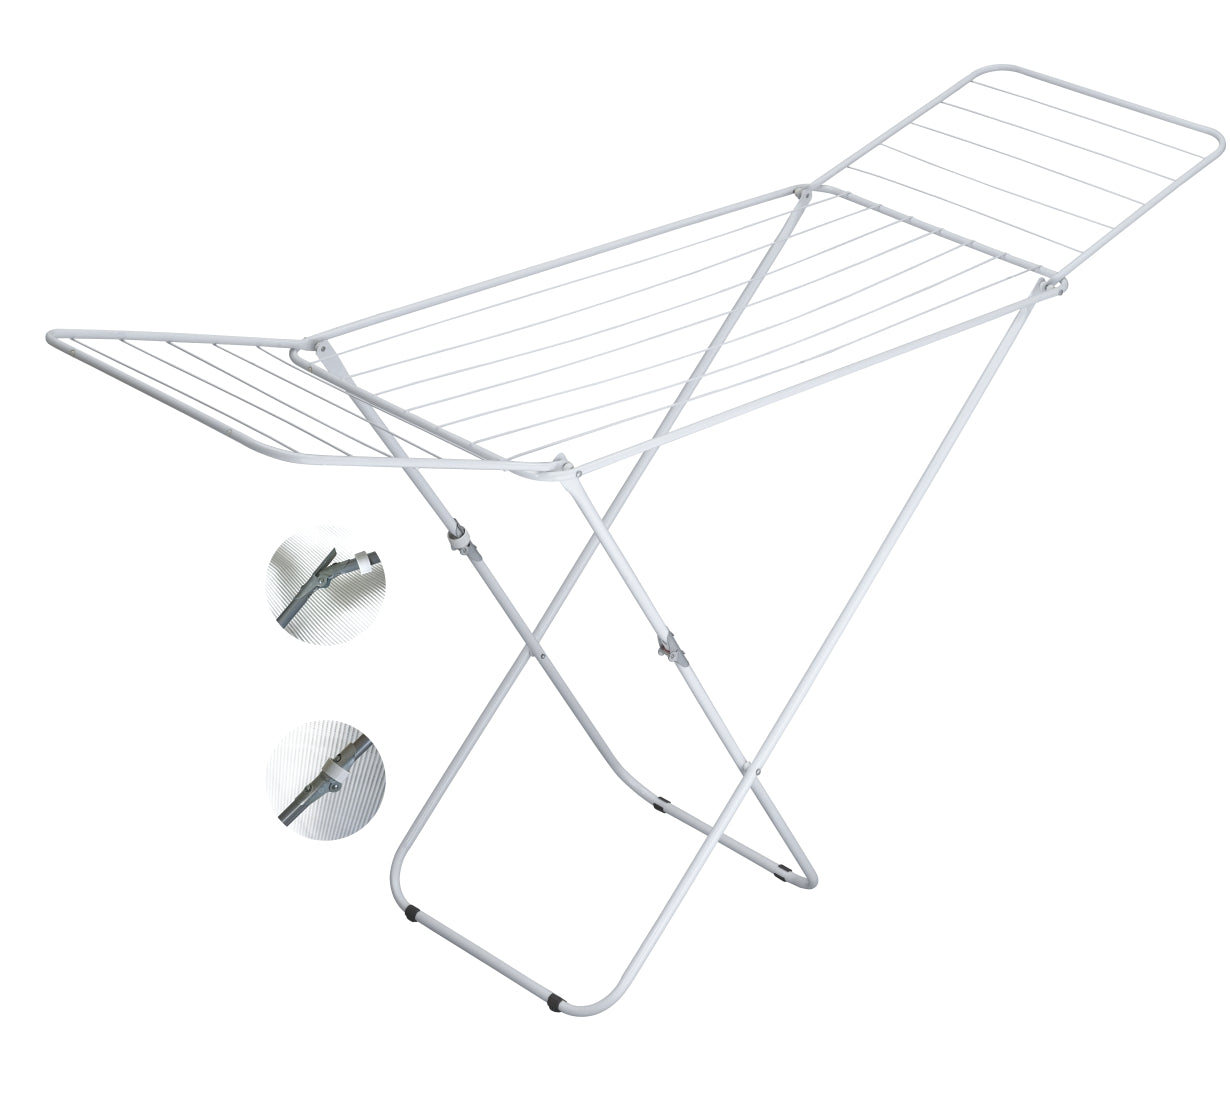 2020 bestseller Standing Rack Metal Balcony clothes hanger folding drying rack cloth with expandable wings